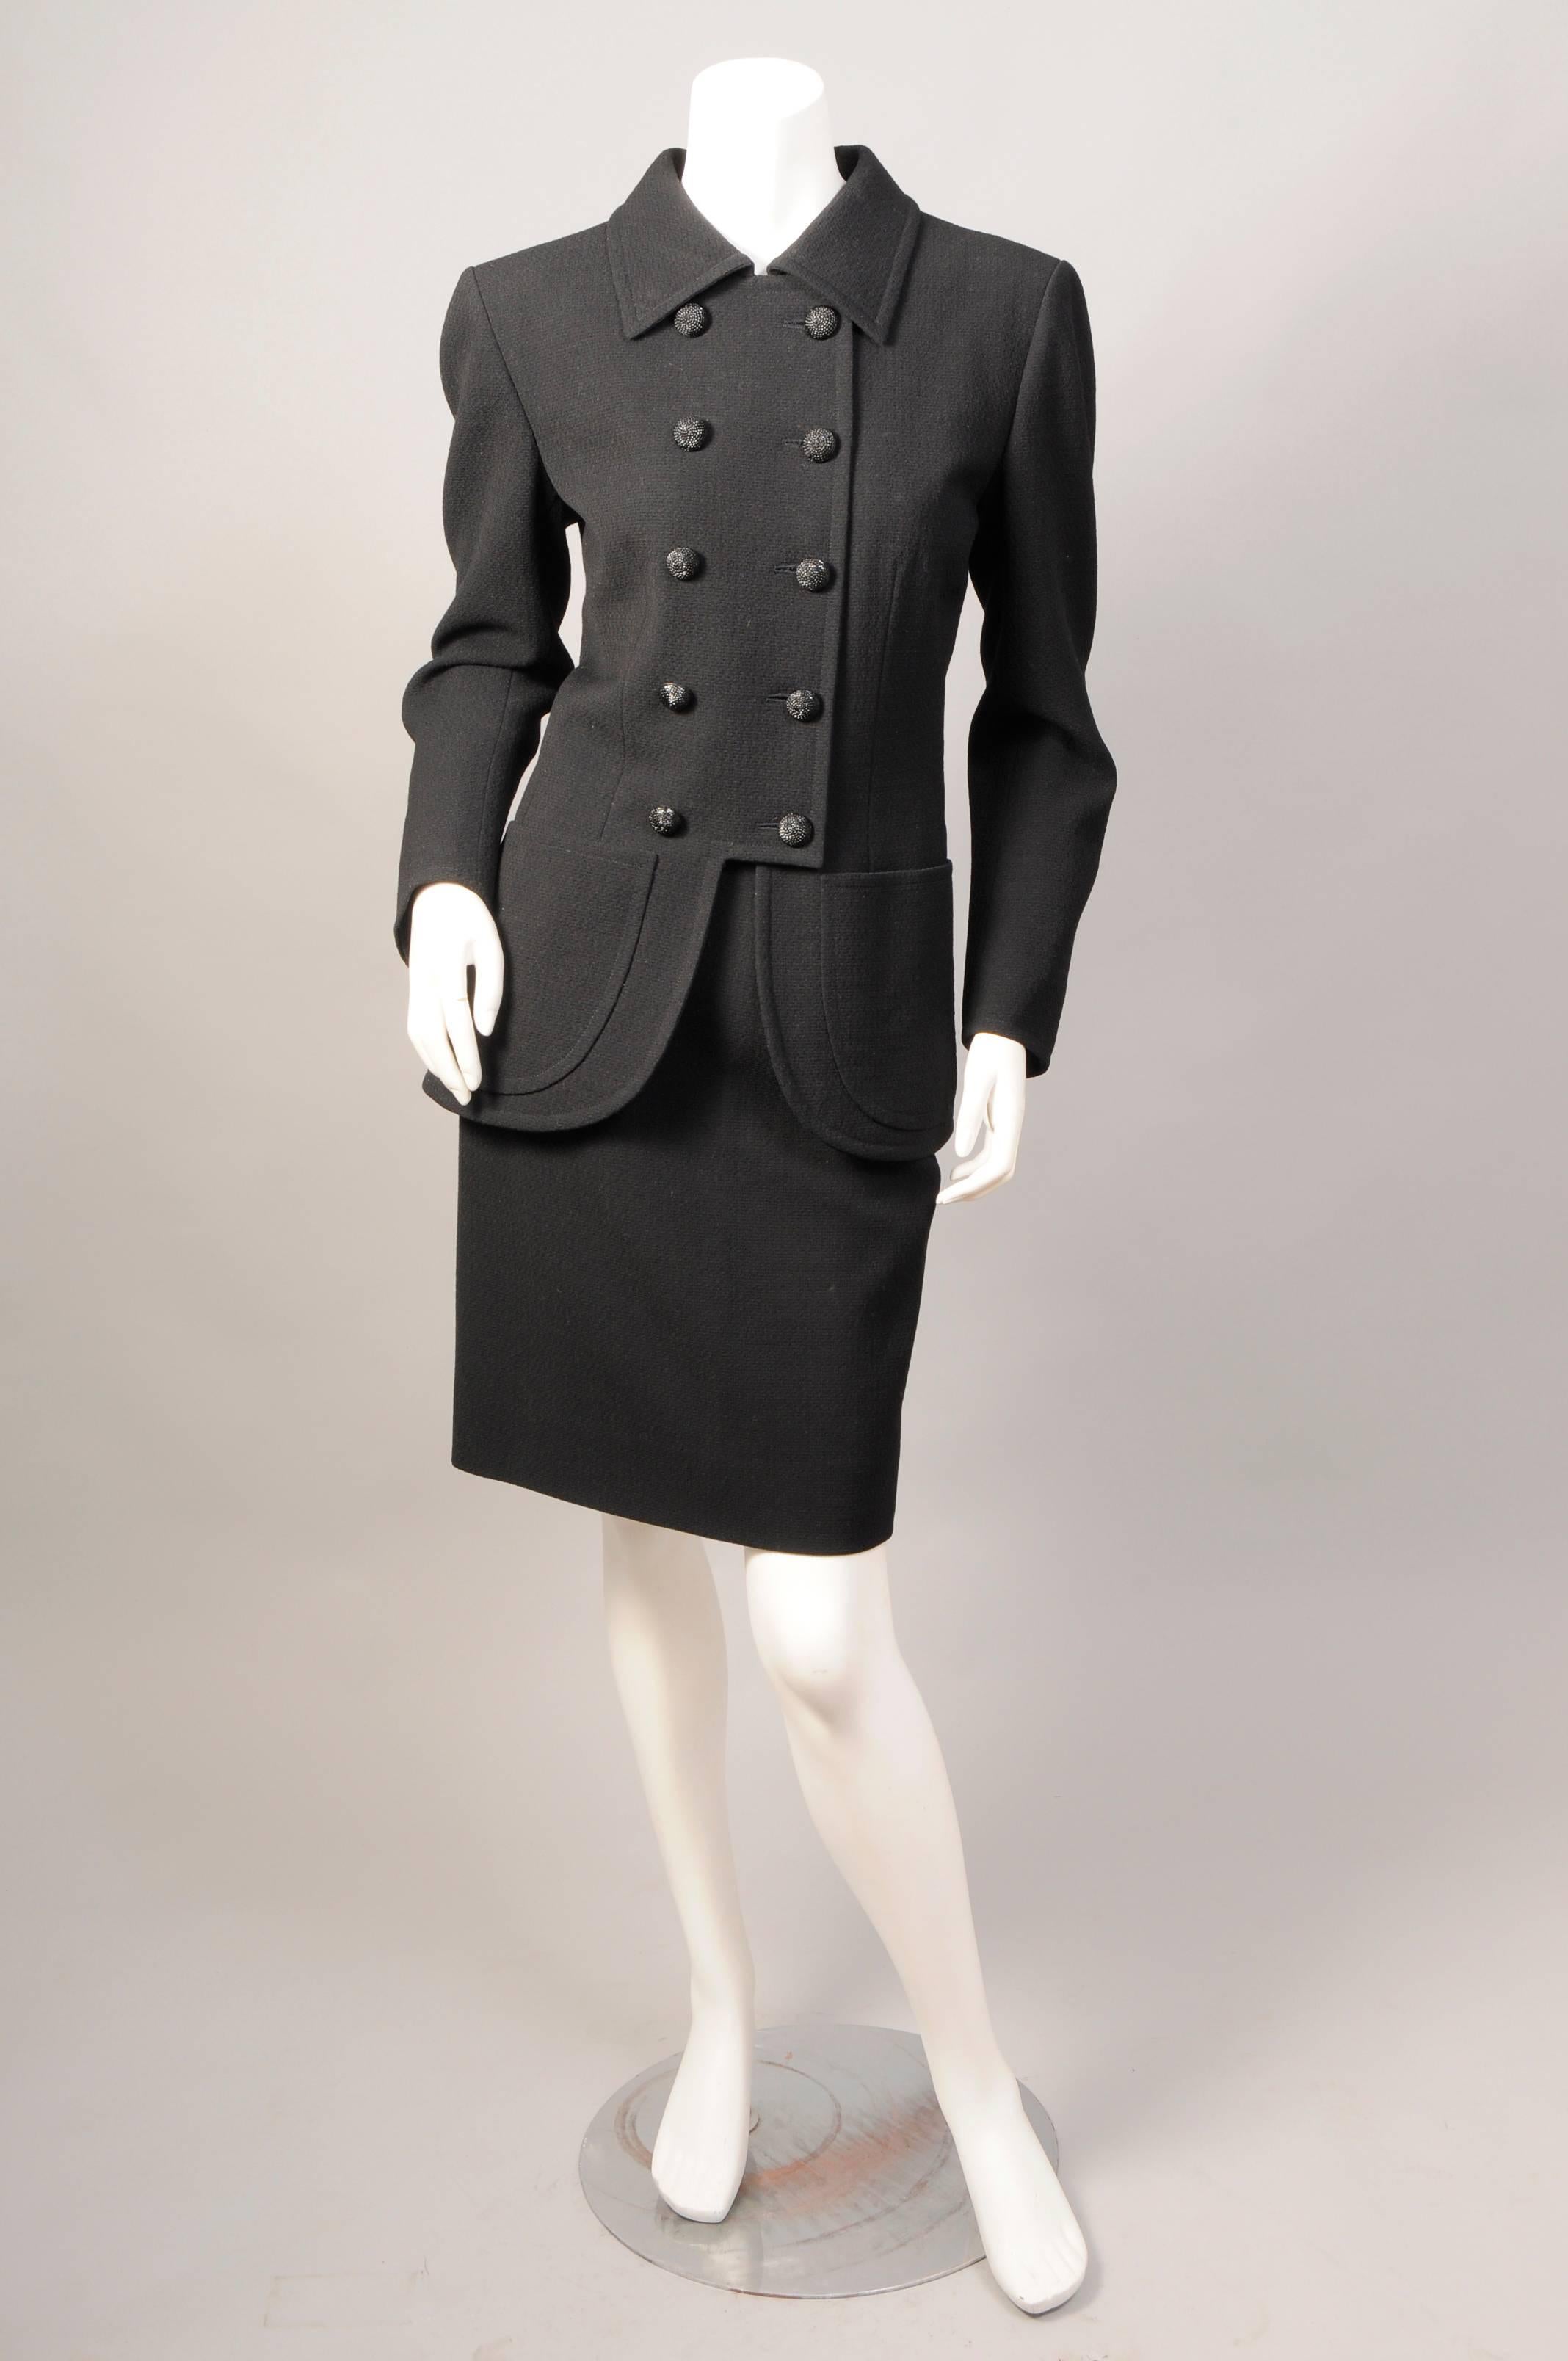 This late 1970's or very early 1980's black wool suit from Yves Saint Laurent  Haute Couture is a stunning example of true French couture tailoring. Made in the YSL atelier in Paris the suit has a great deal of hand finishing in the couture manner.